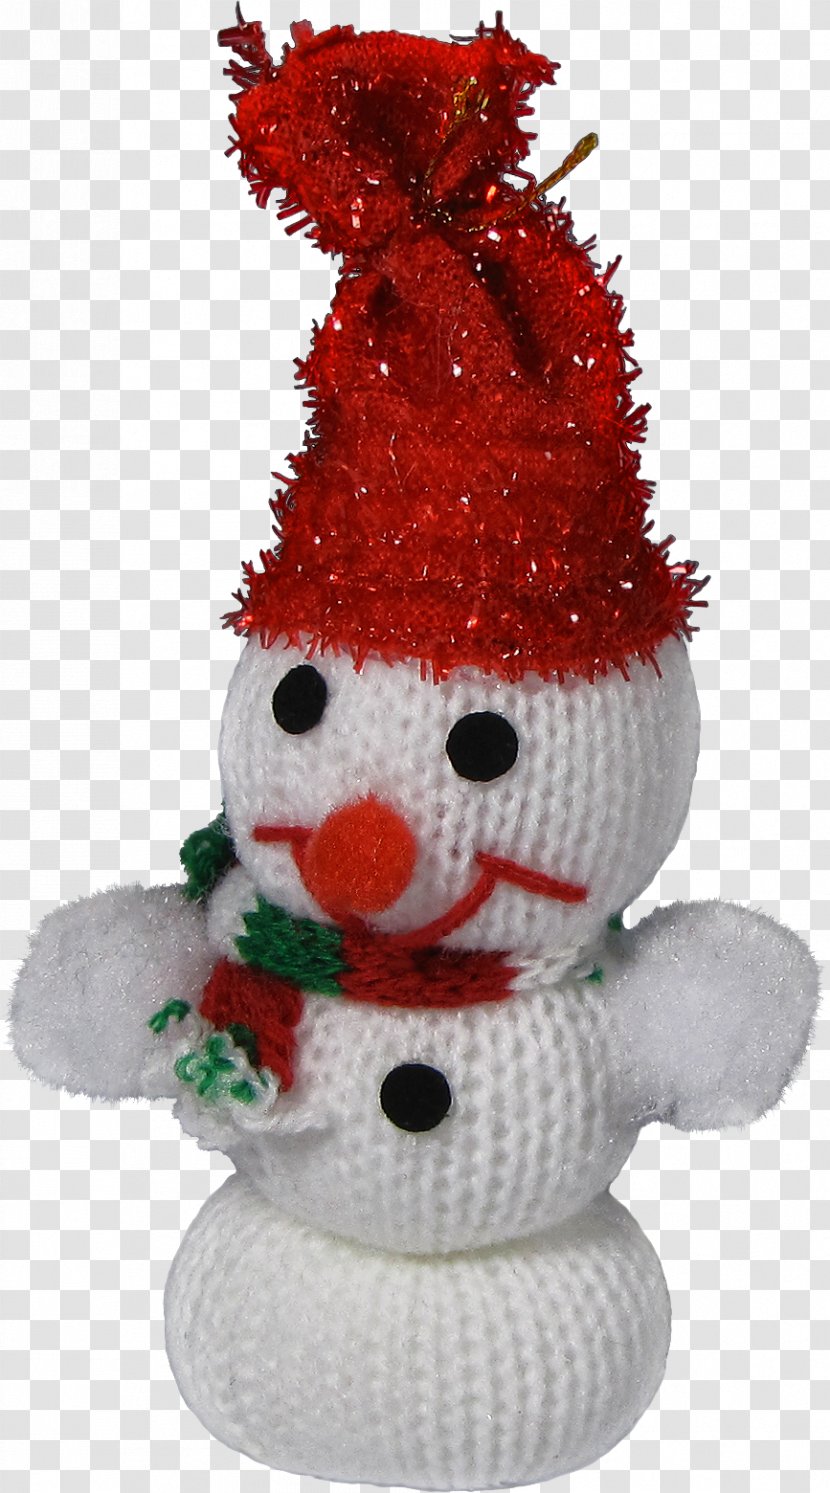 Snowman - Christmas Tree - Lovely Transparent PNG